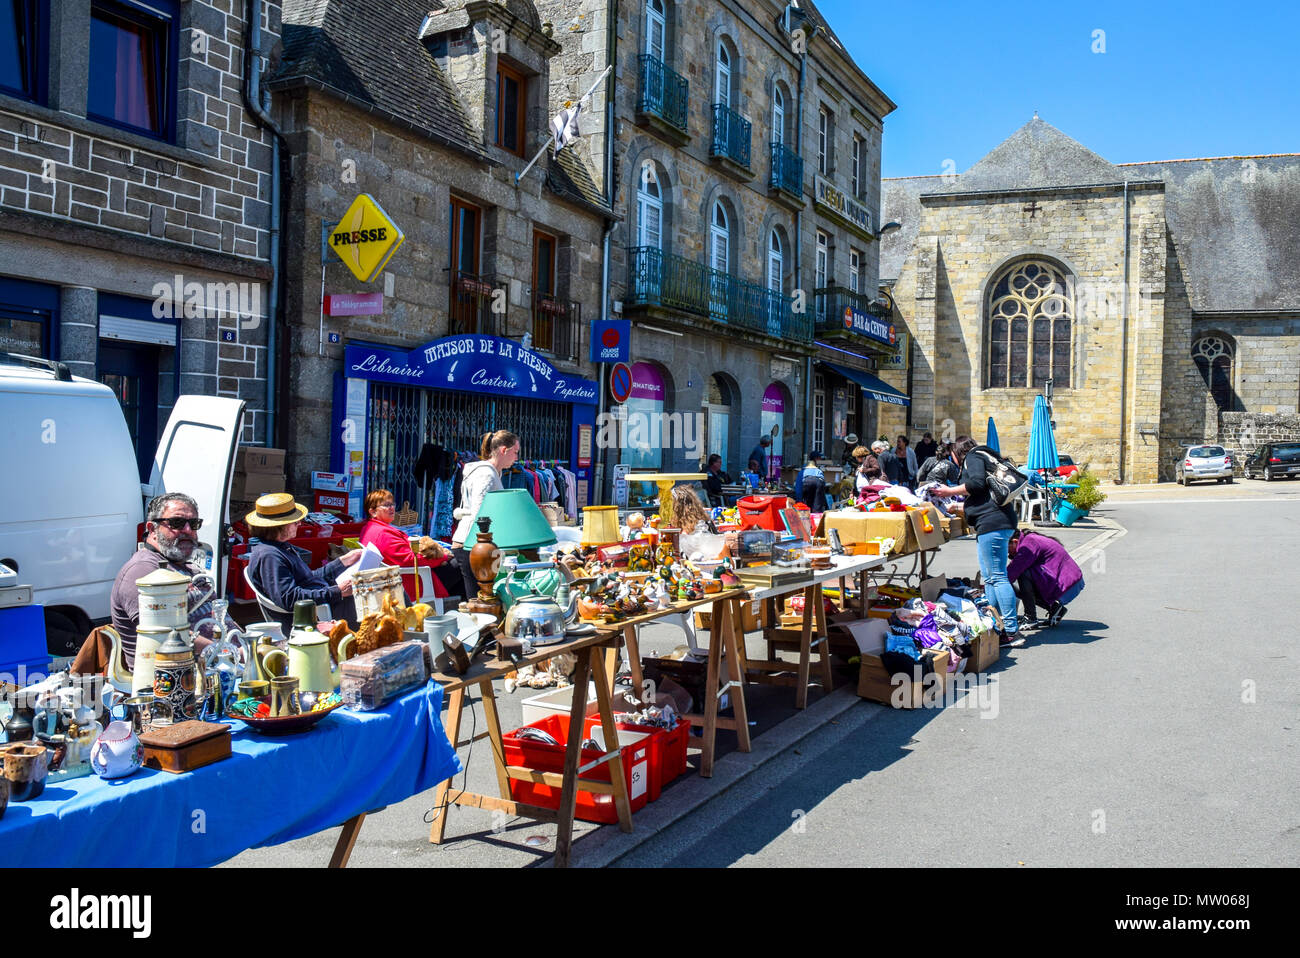 A very sunny market day in the town square in Rostrenan, Brittany, France. Stock Photo